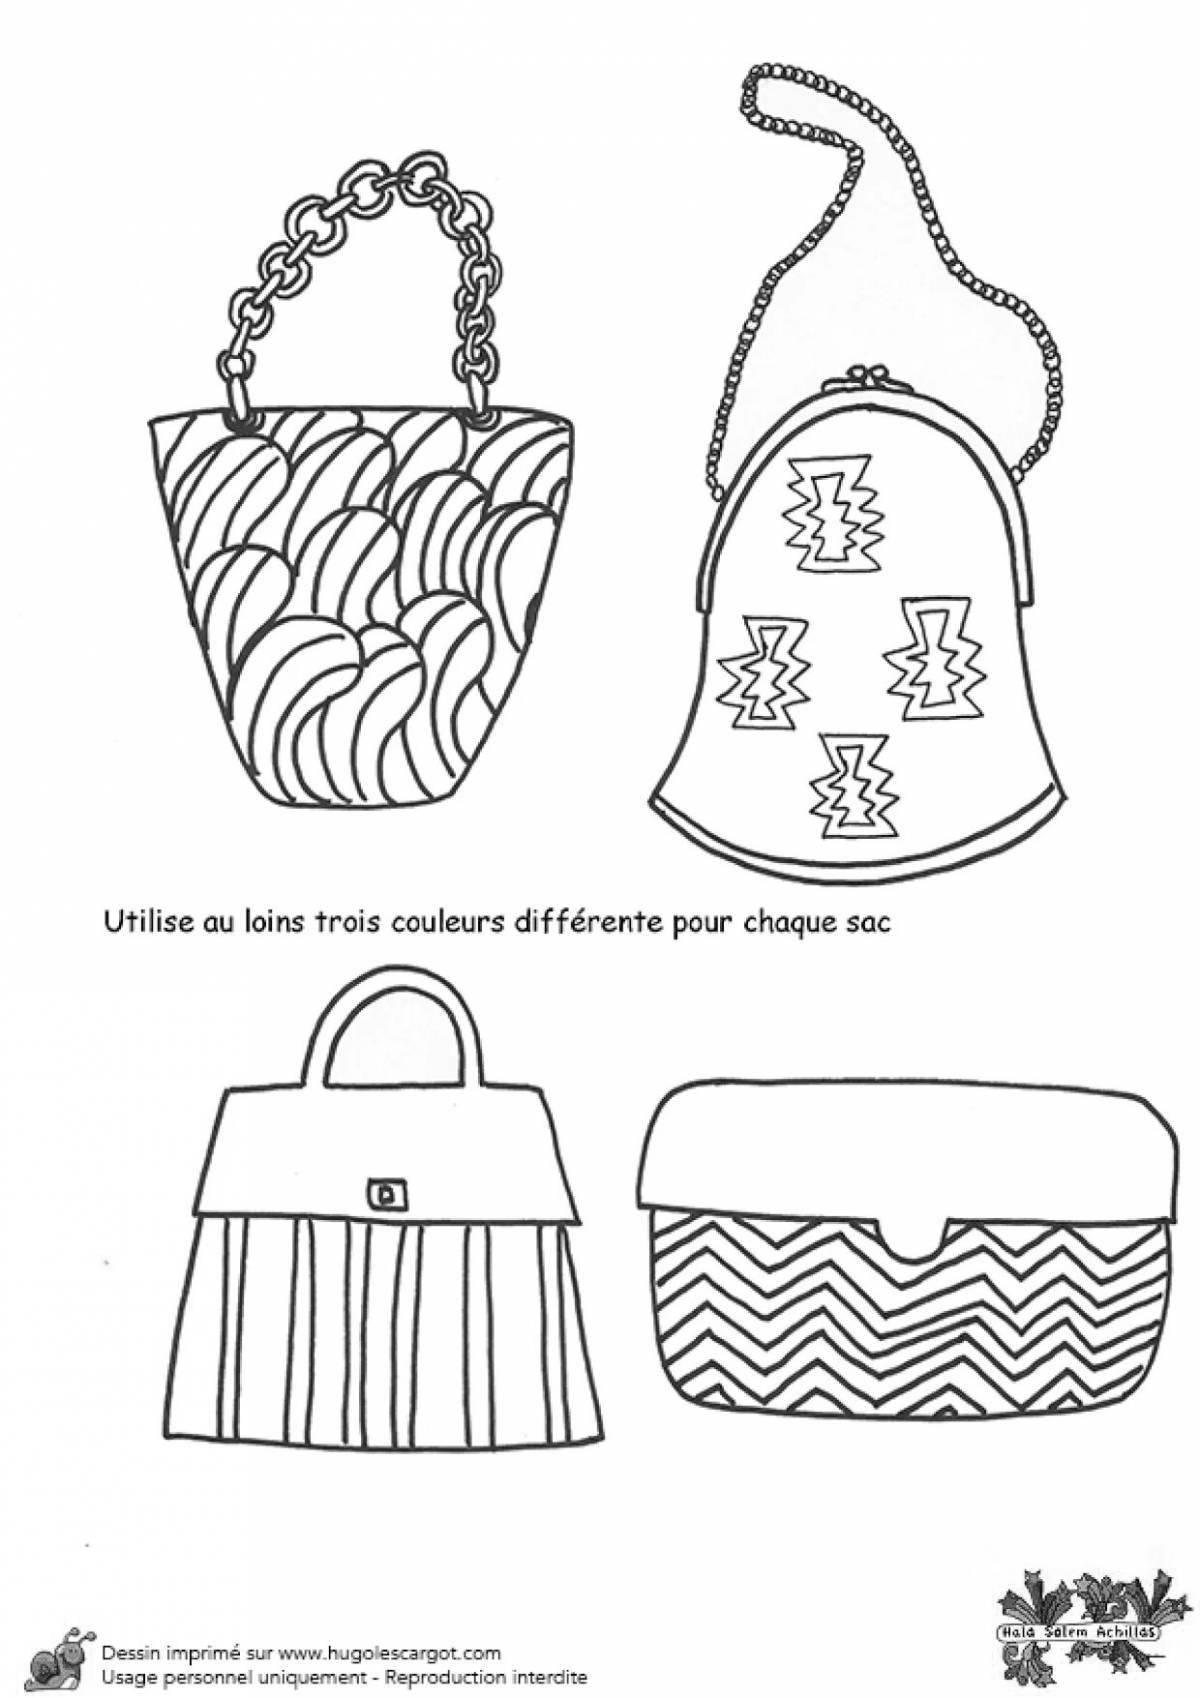 Coloring page adorable accessories for girls